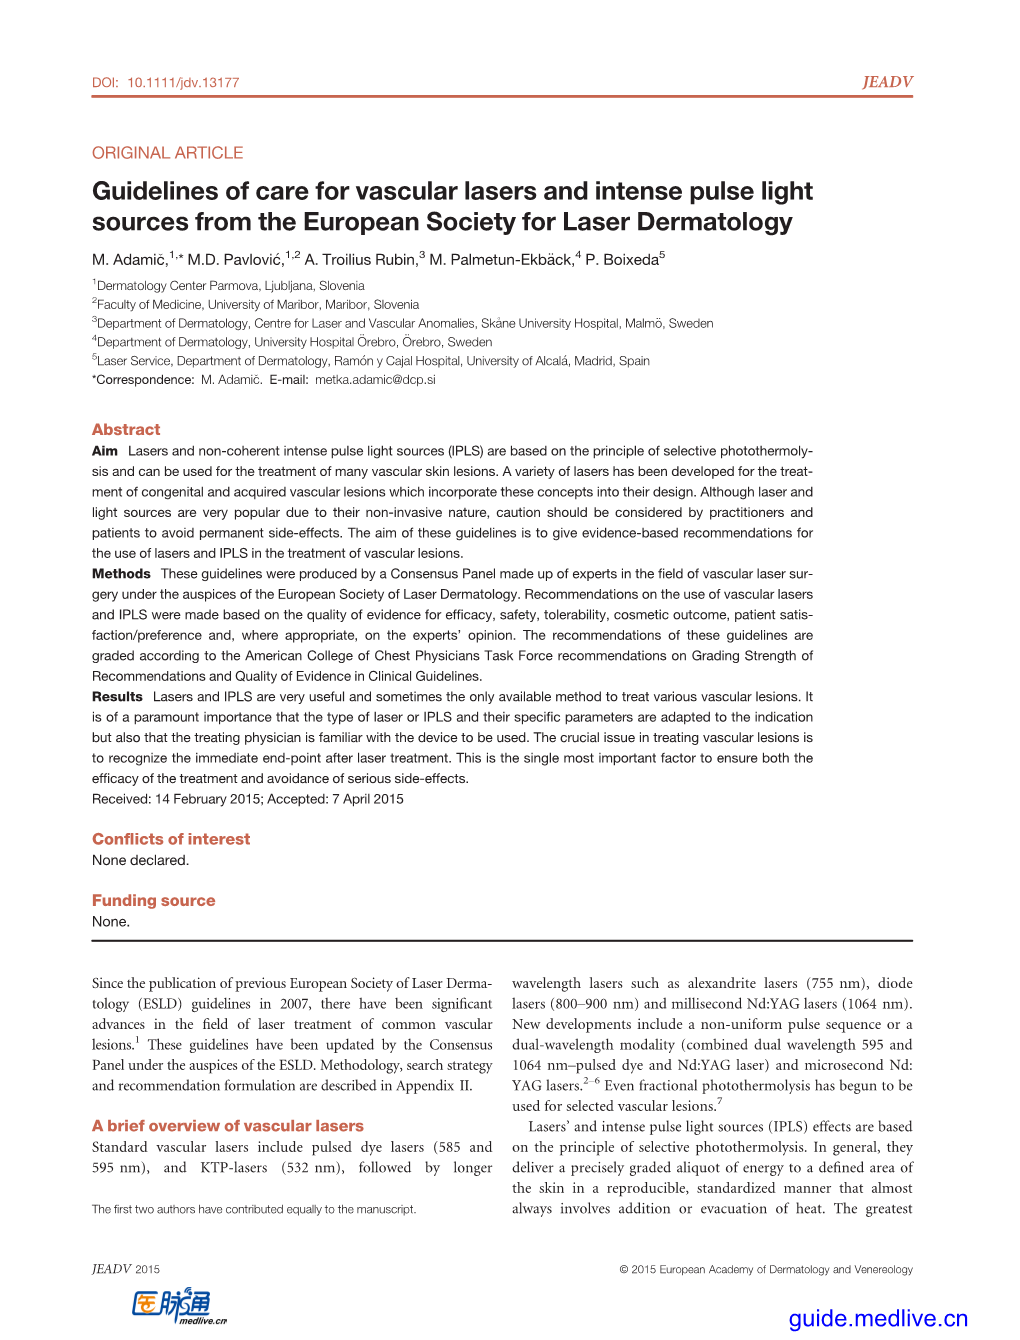 Guidelines of Care for Vascular Lasers and Intense Pulse Light Sources from the European Society for Laser Dermatology